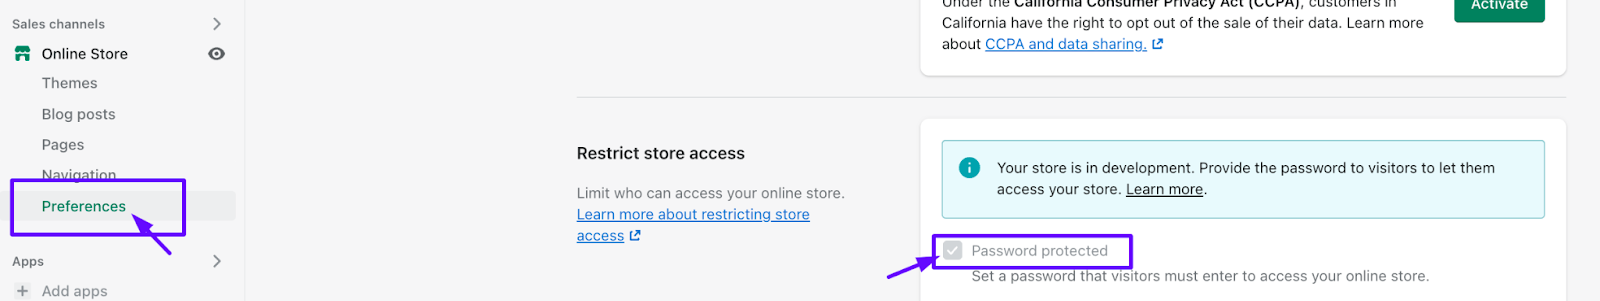 Restrict store access in Shopify Admin